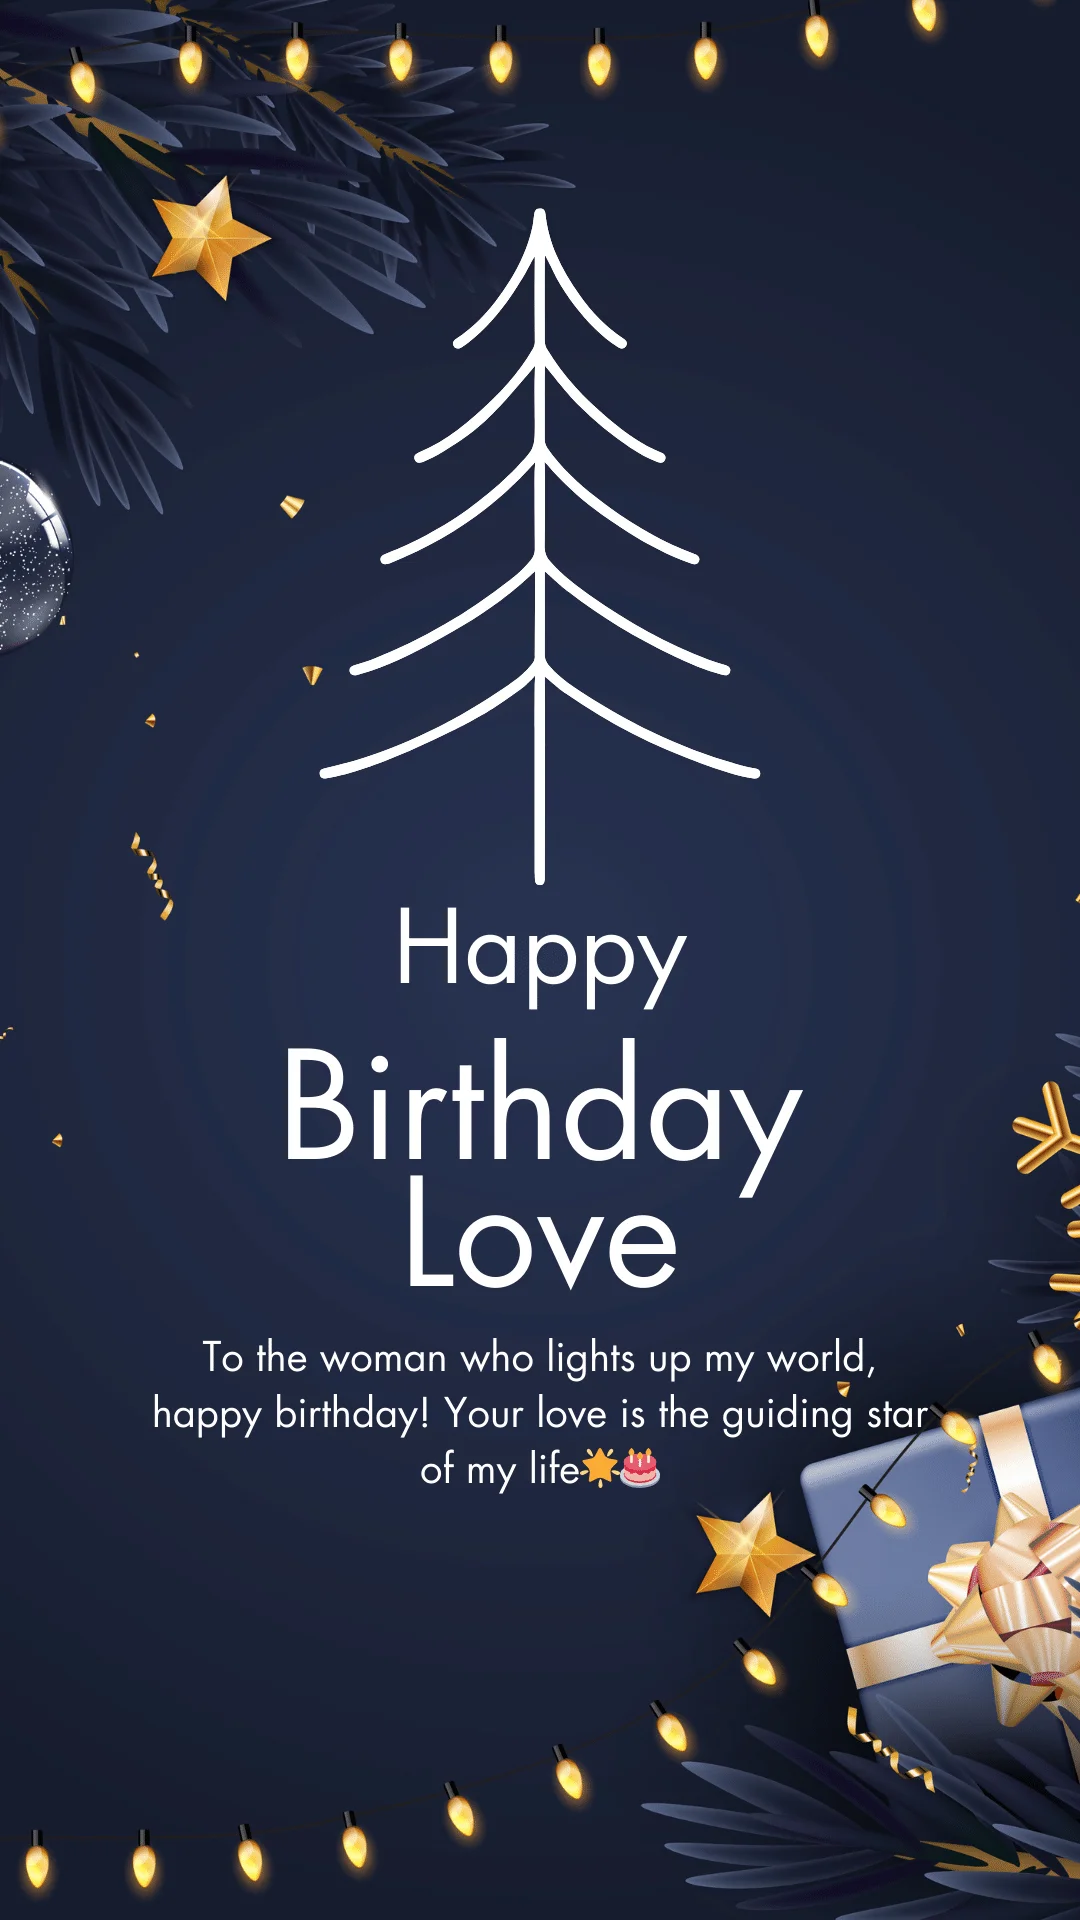 Blue-And-White-Birthday-Card-For-Boy-Friend